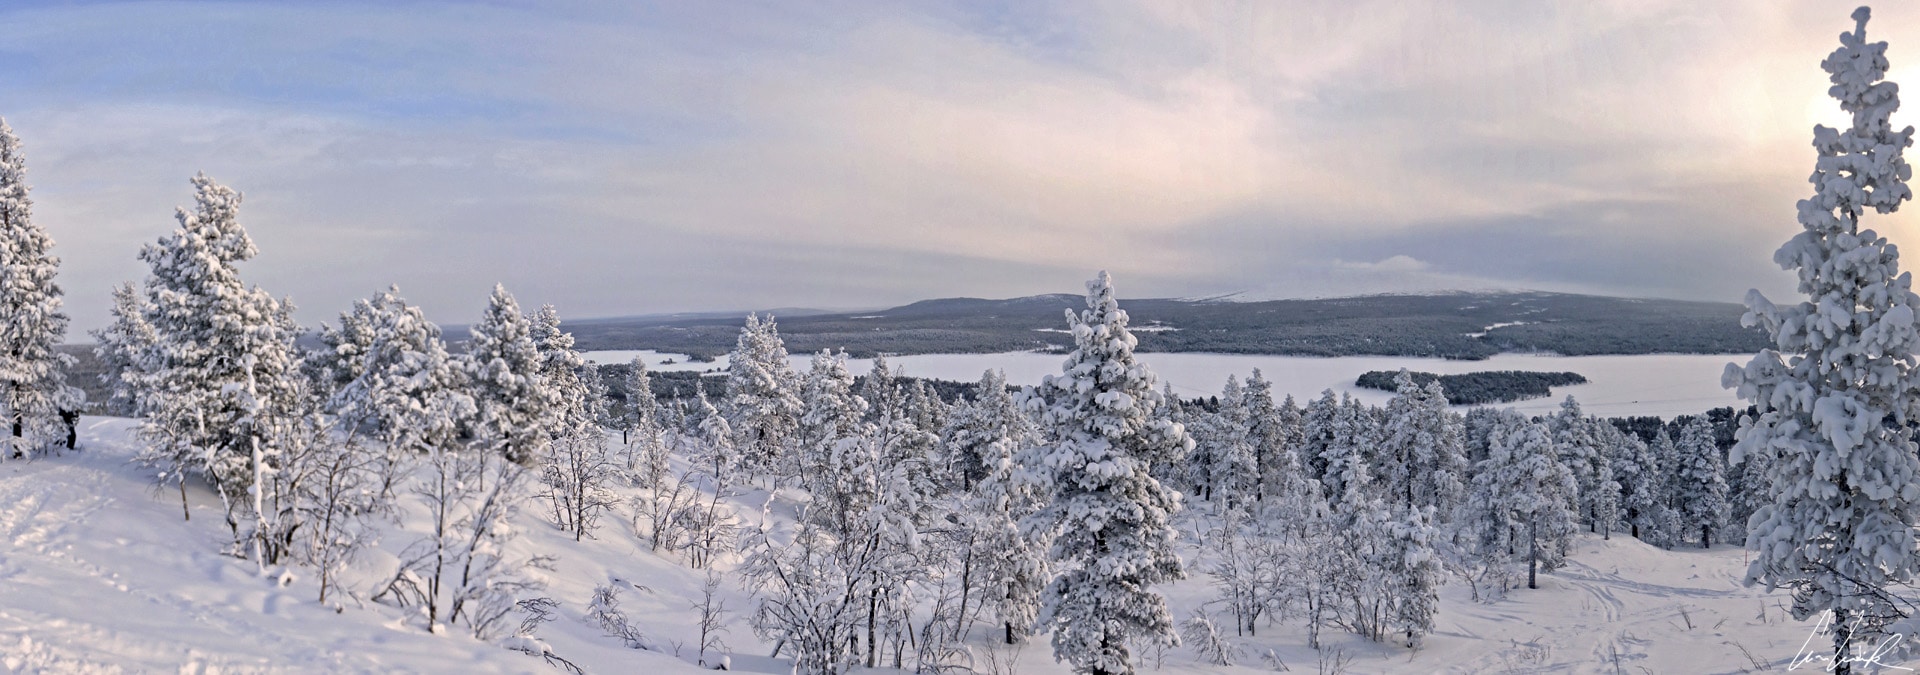 From the top of the Jyppyrä hill (2,200 feet above sea level) you have a breathtaking panoramic view of of Lake Ounasjärvi and its surroundings.